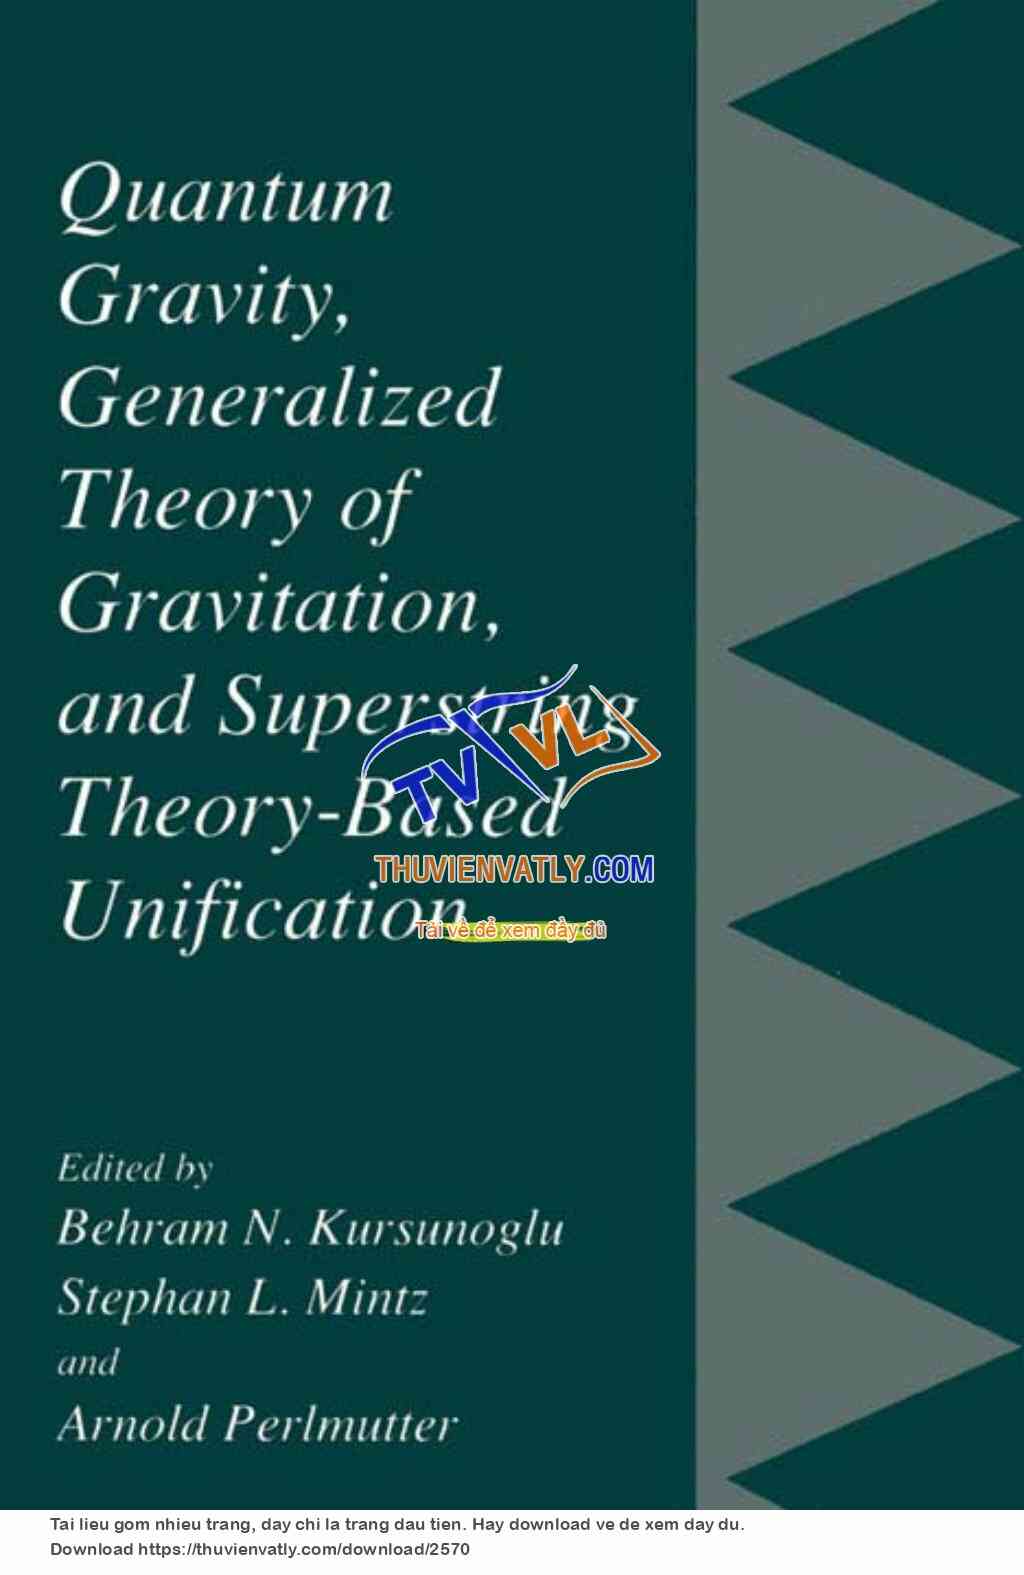 Quantum Gravity, Generalized Theory of Gravitation, and SuperstringTheory-Based Unification